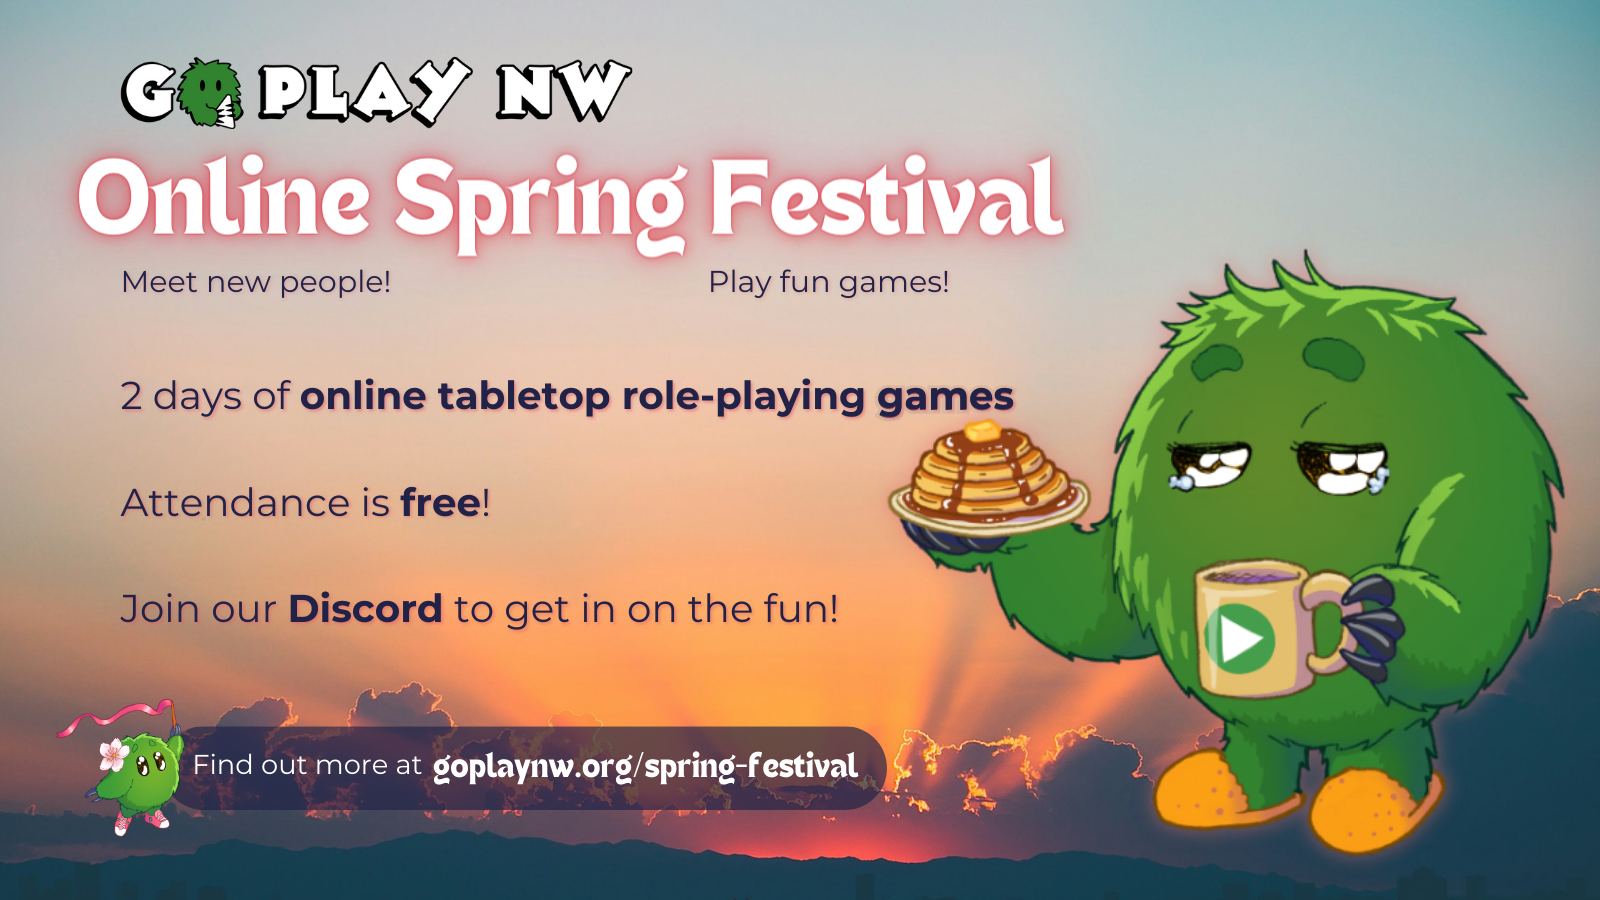 Go Play NW presents Online Spring Festival, May 4–5, 2024. 2 days of online games. Attendance is free. Join our Discord to get in on the fun! Next to the text, Go the fuzzy green creature has a bleary-eyed expression while holding up a plate of pancakes and a mug of coffee, over a sunrise background.